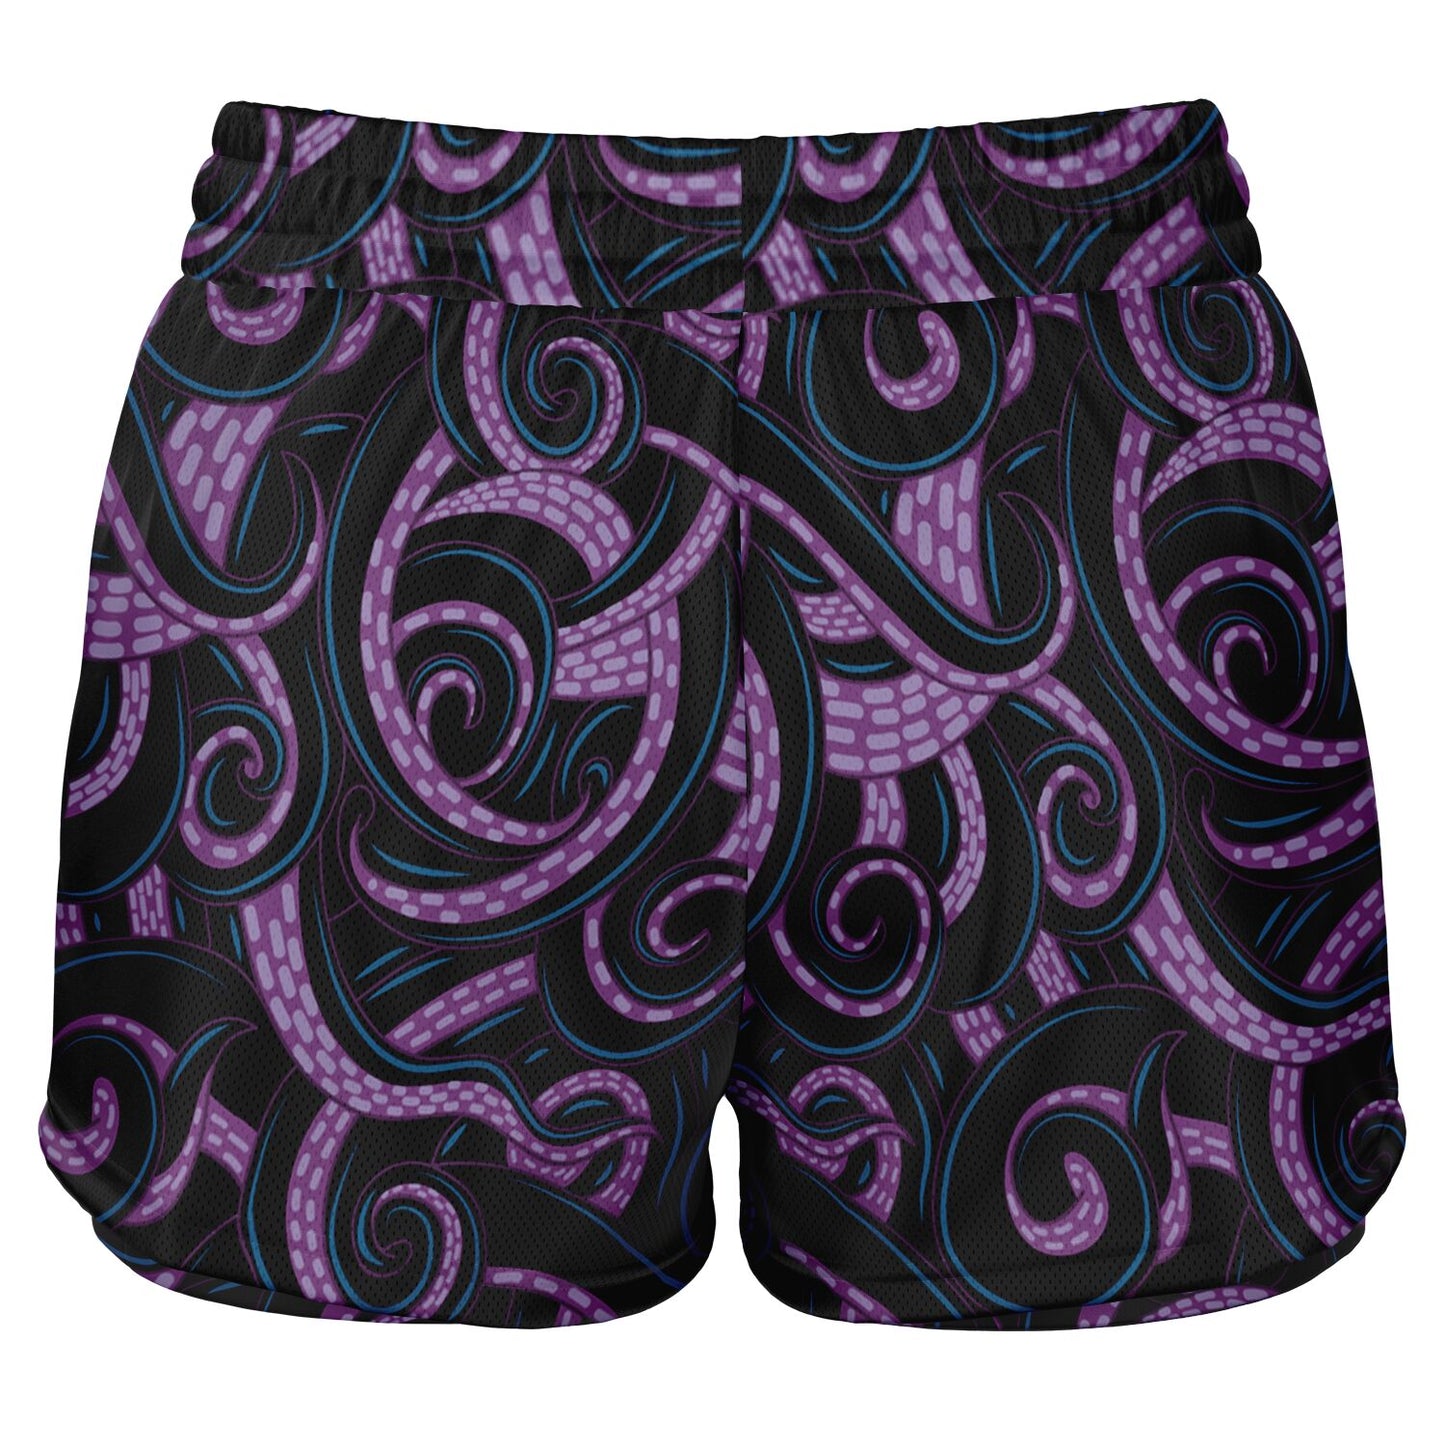 Ursula Tentacles 2-in-1 Shorts